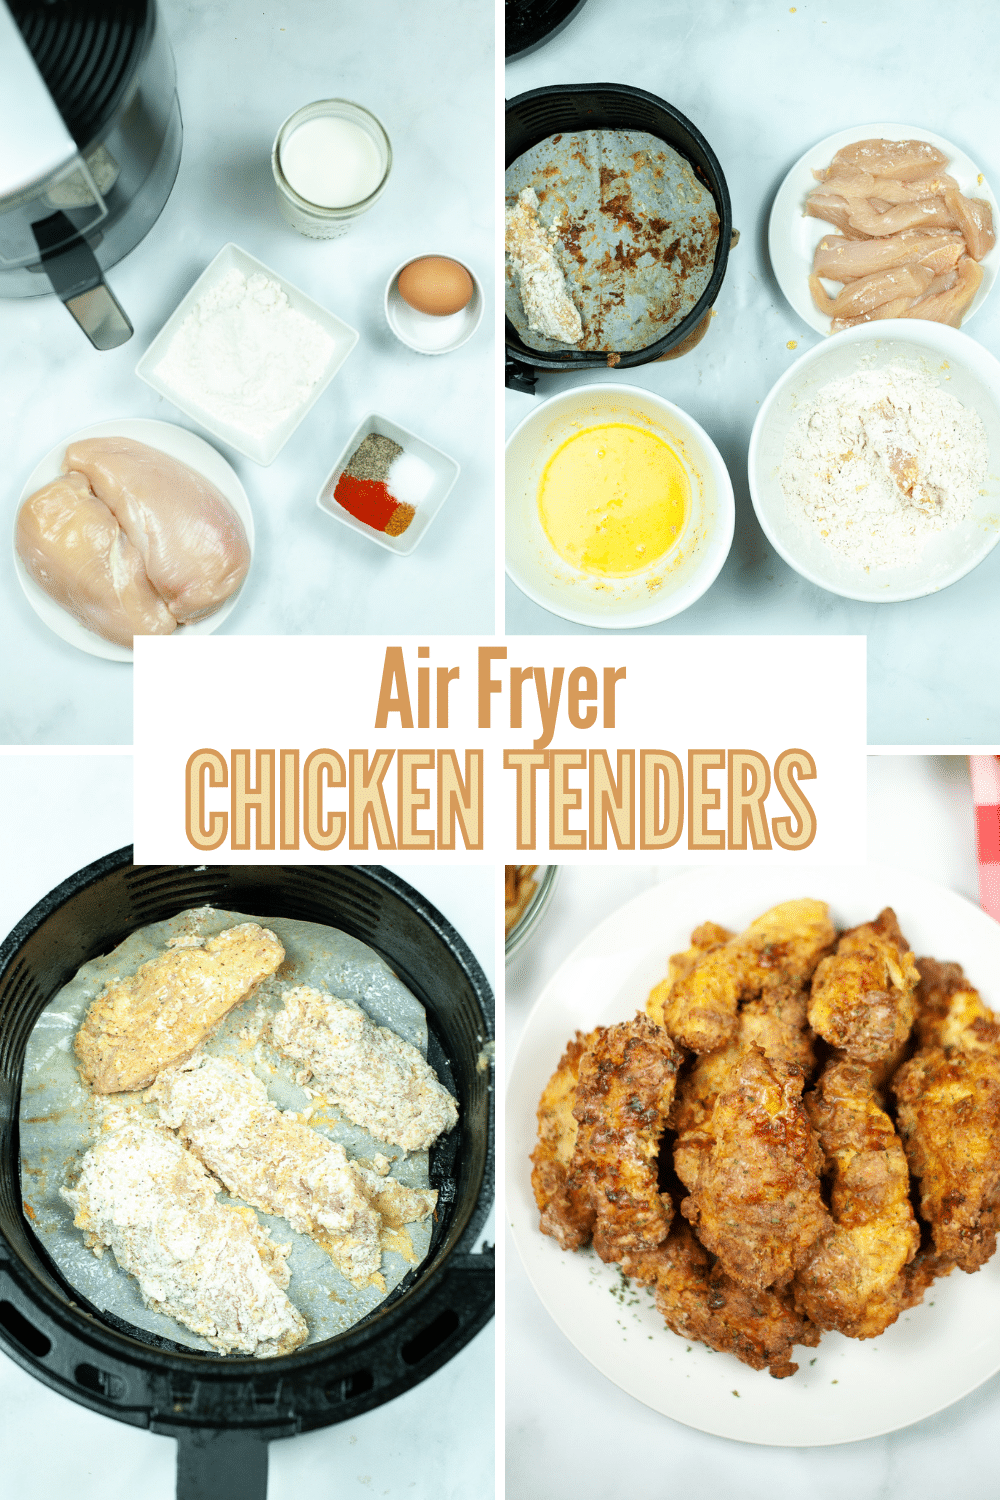 Air Fryer chicken tenders are crispy on the outside and juicy on the inside. You'll never want to eat fried chicken again! #airfryer #chickentenders #chicken #recipe via @wondermomwannab